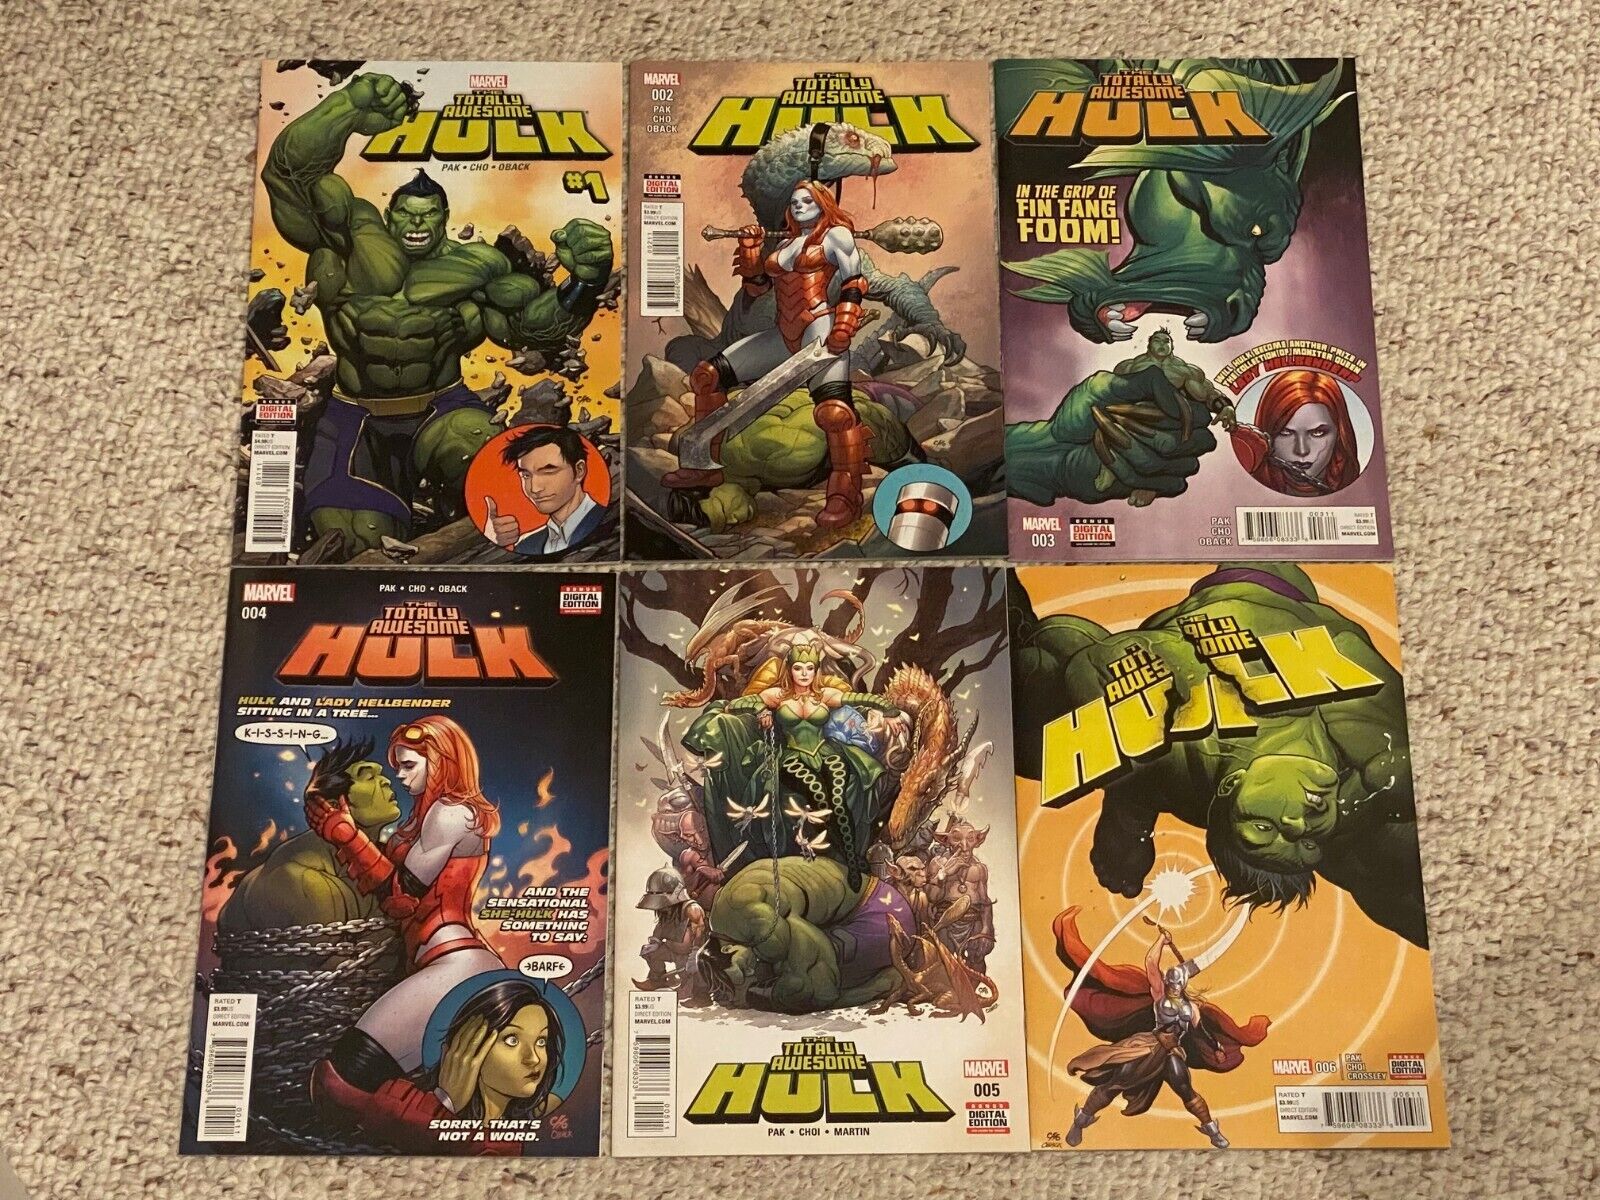 THE TOTALLY AWESOME HULK ISSUES #1-6 BY FRANK CHO